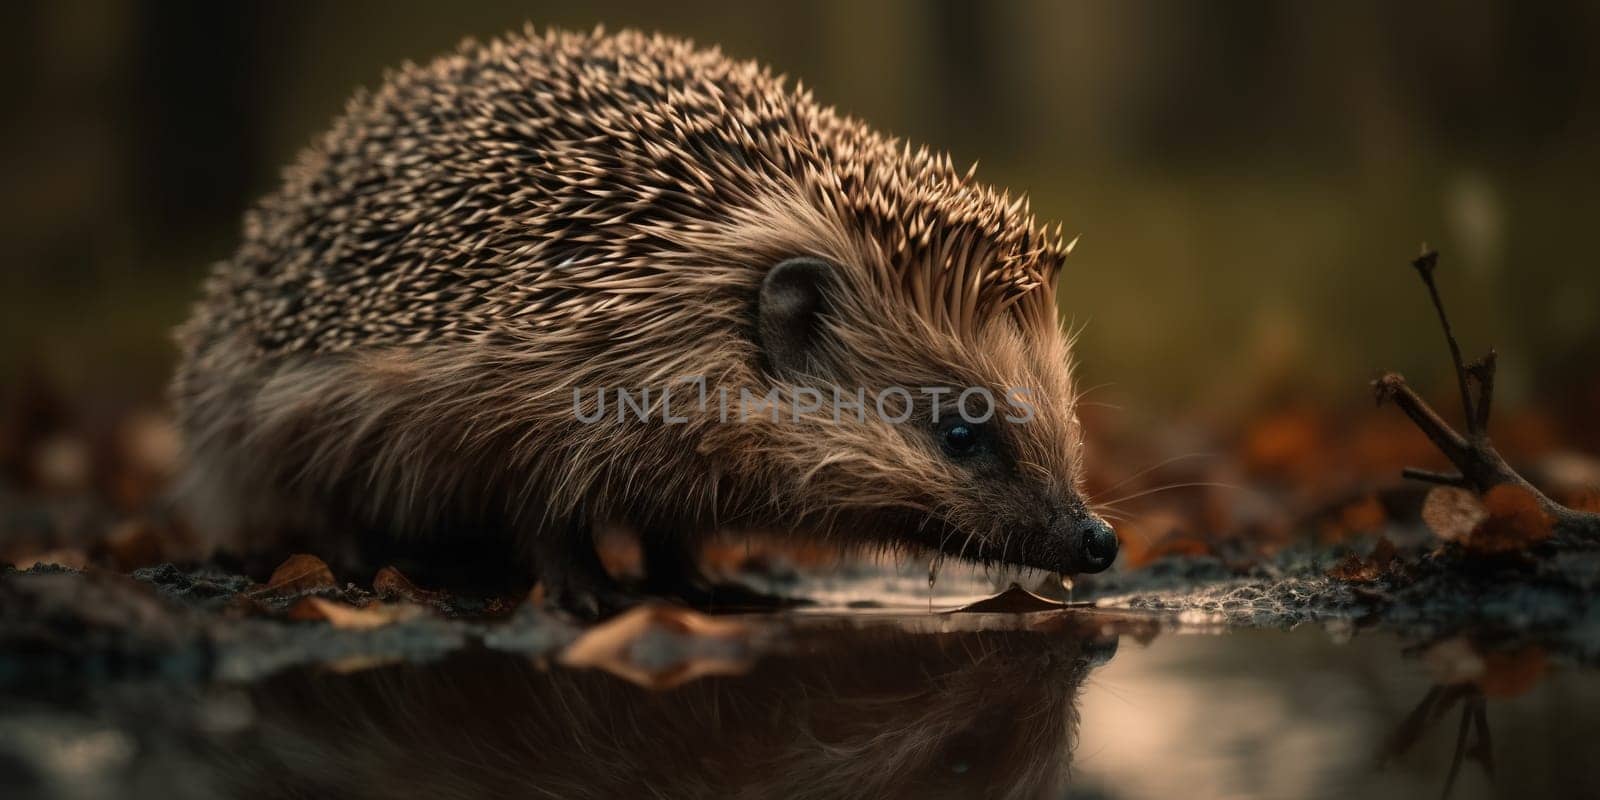 Wild Hedgehog Drinks Water From The Creek In The Forest by tan4ikk1